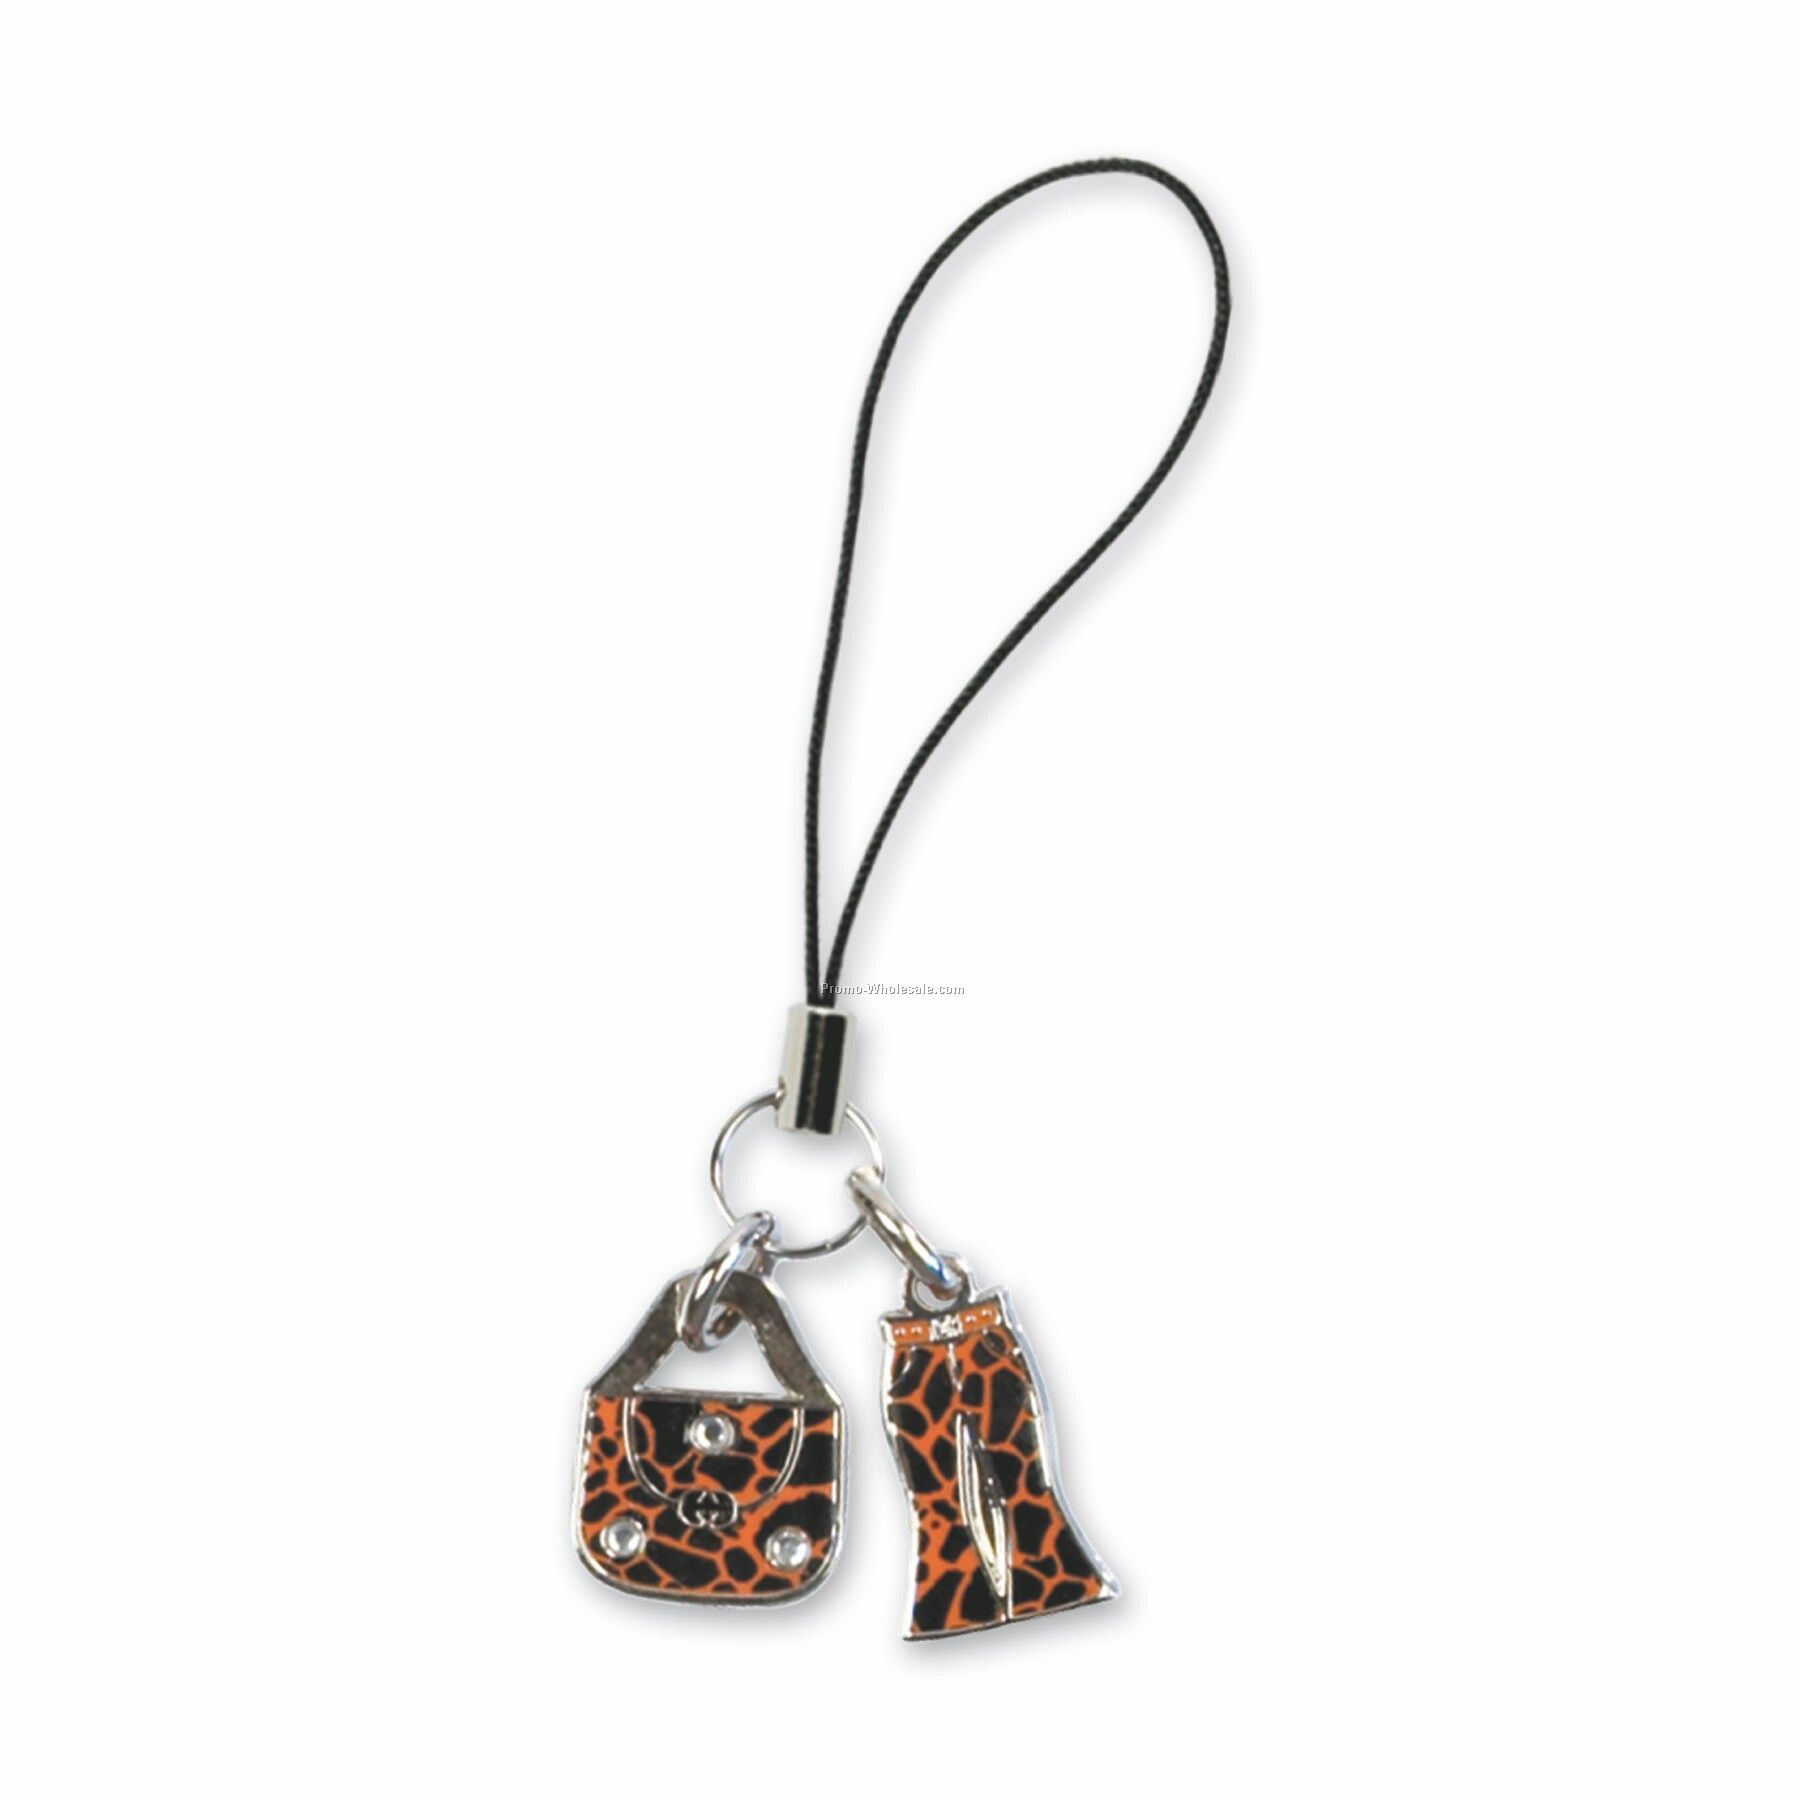 Cnij Cellphone Charms W/ Cord Strap (Up To 1")